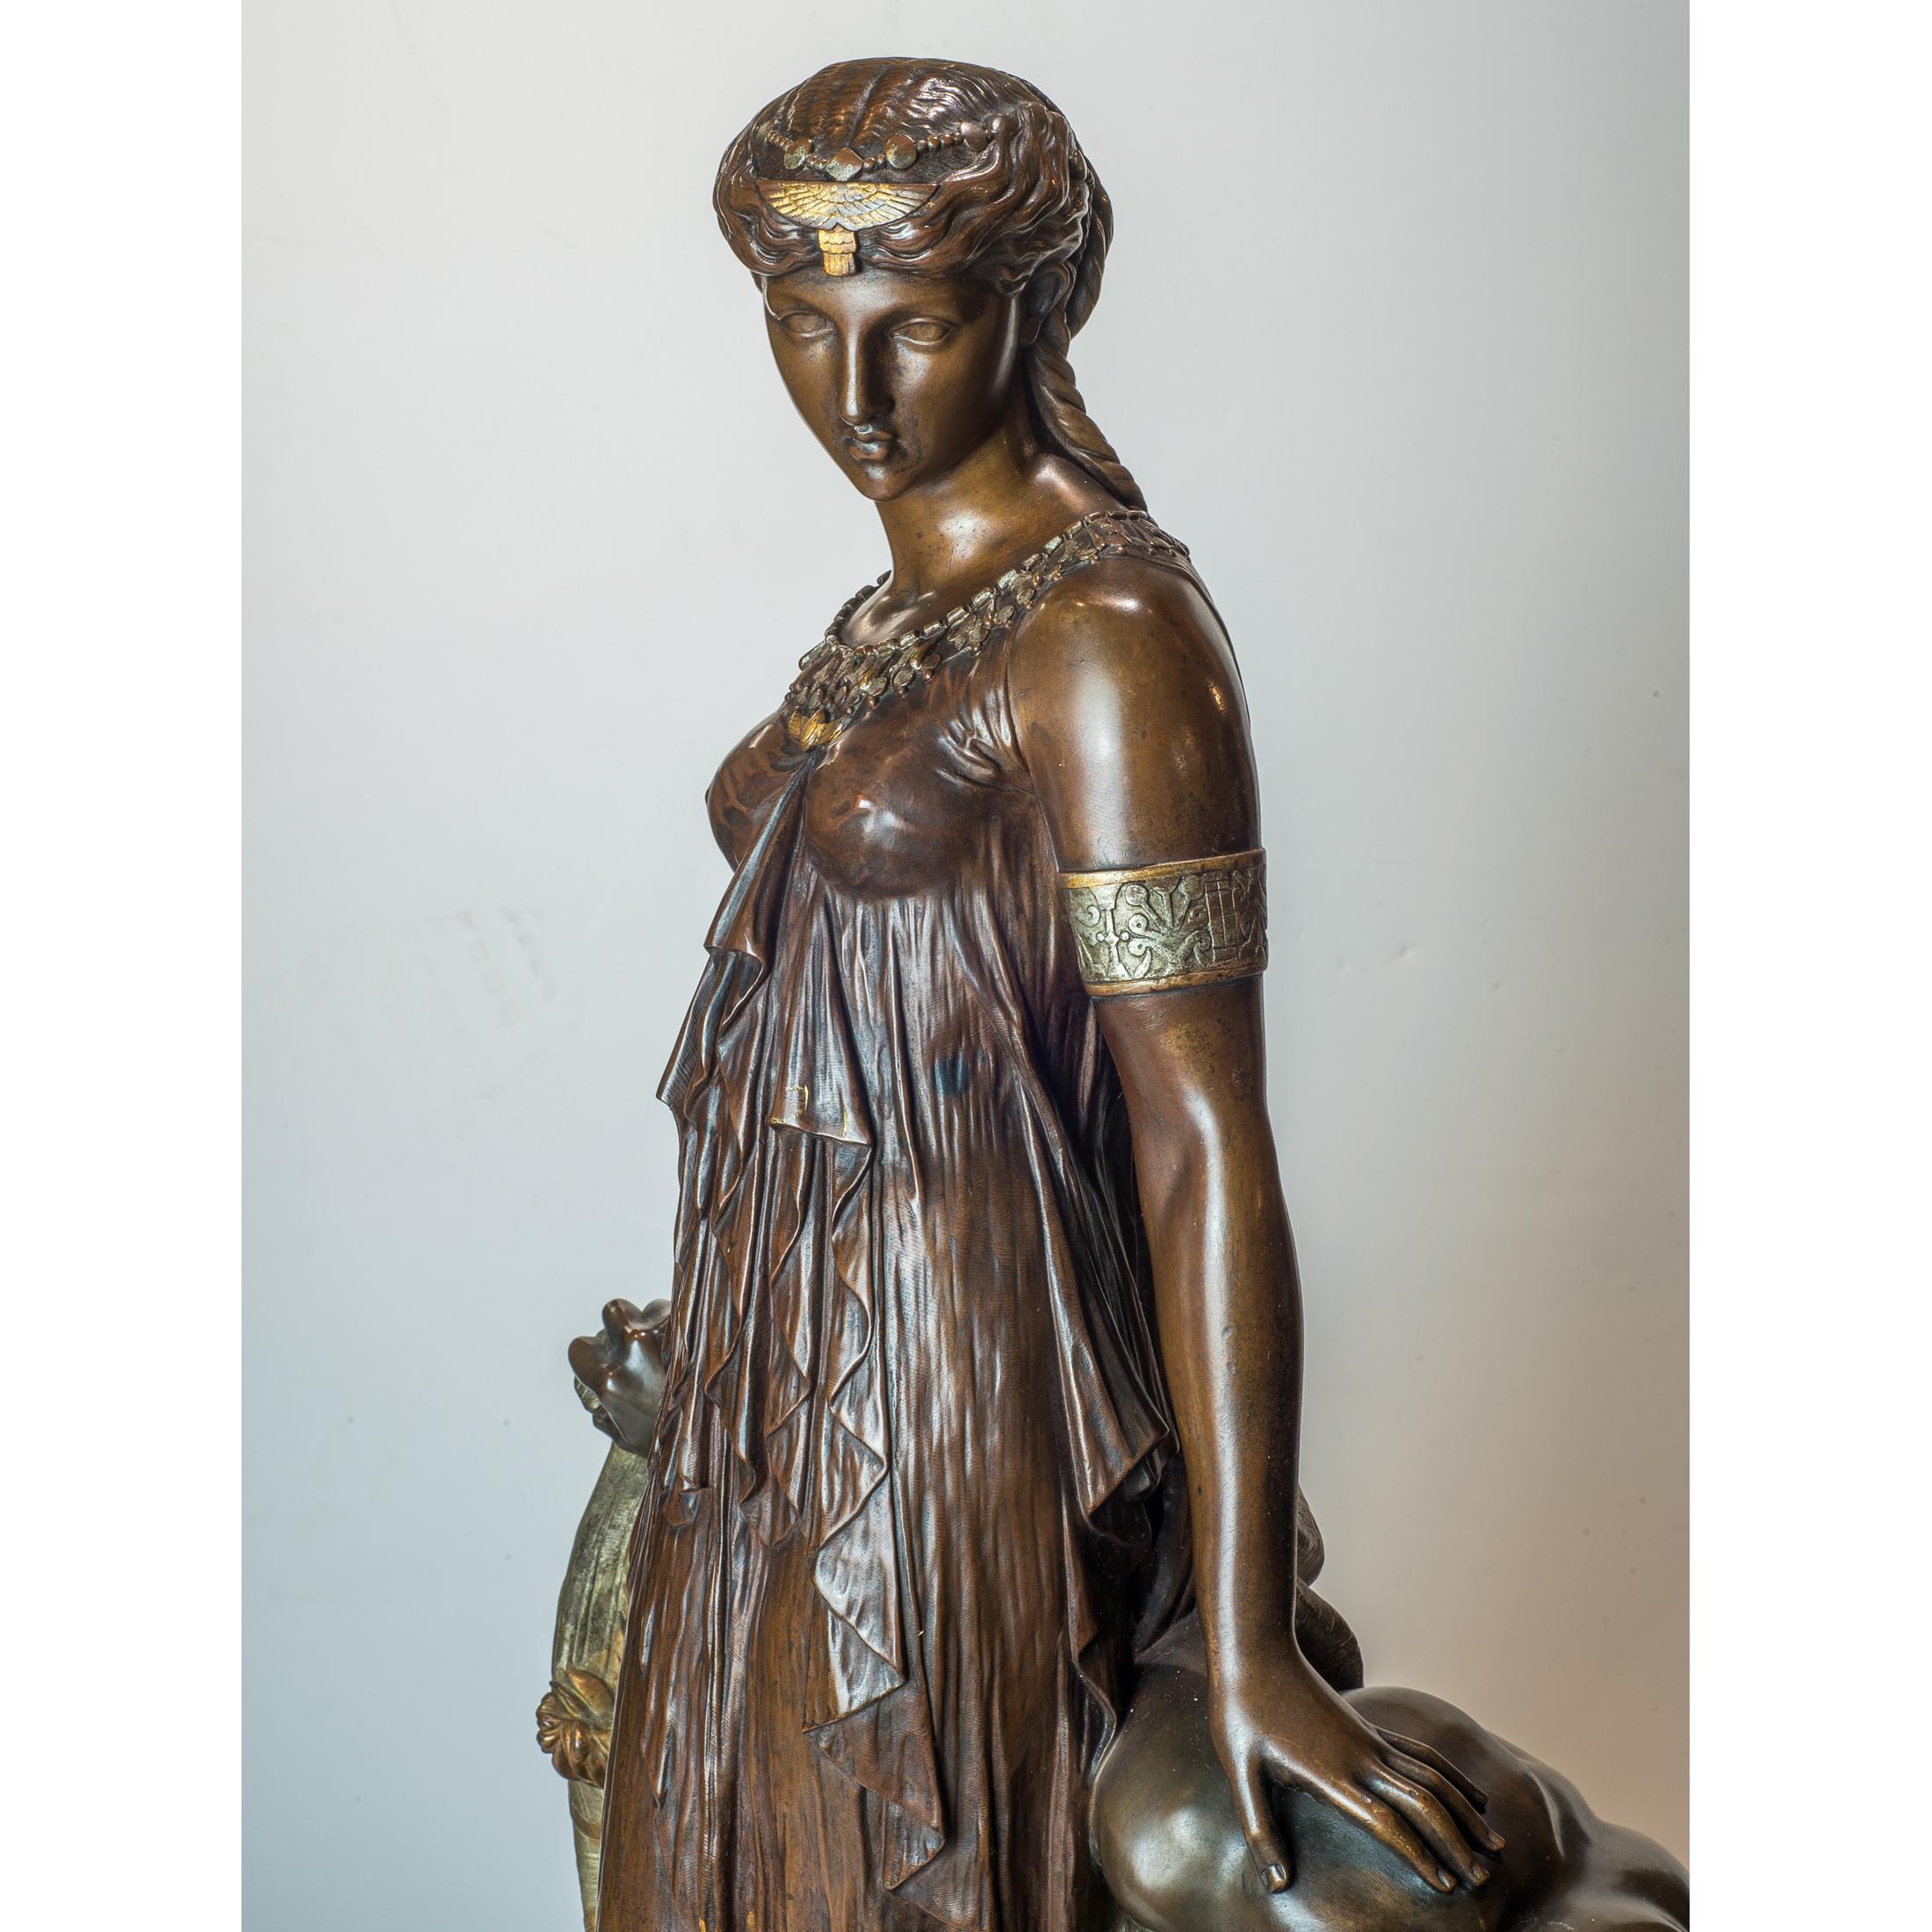 ÉTIENNE HENRY DUMAIGE
French, 1830-1888

Egyptian Princess
Signed 'H. DUMAIGE' on the cloak.
23 1/2 x 13 1/2 x 9 inches


A Fine Patinated Bronze Group Depicting an Egyptian Princess 
An Egyptian princess adorned with jewelry and wearing diaphanous